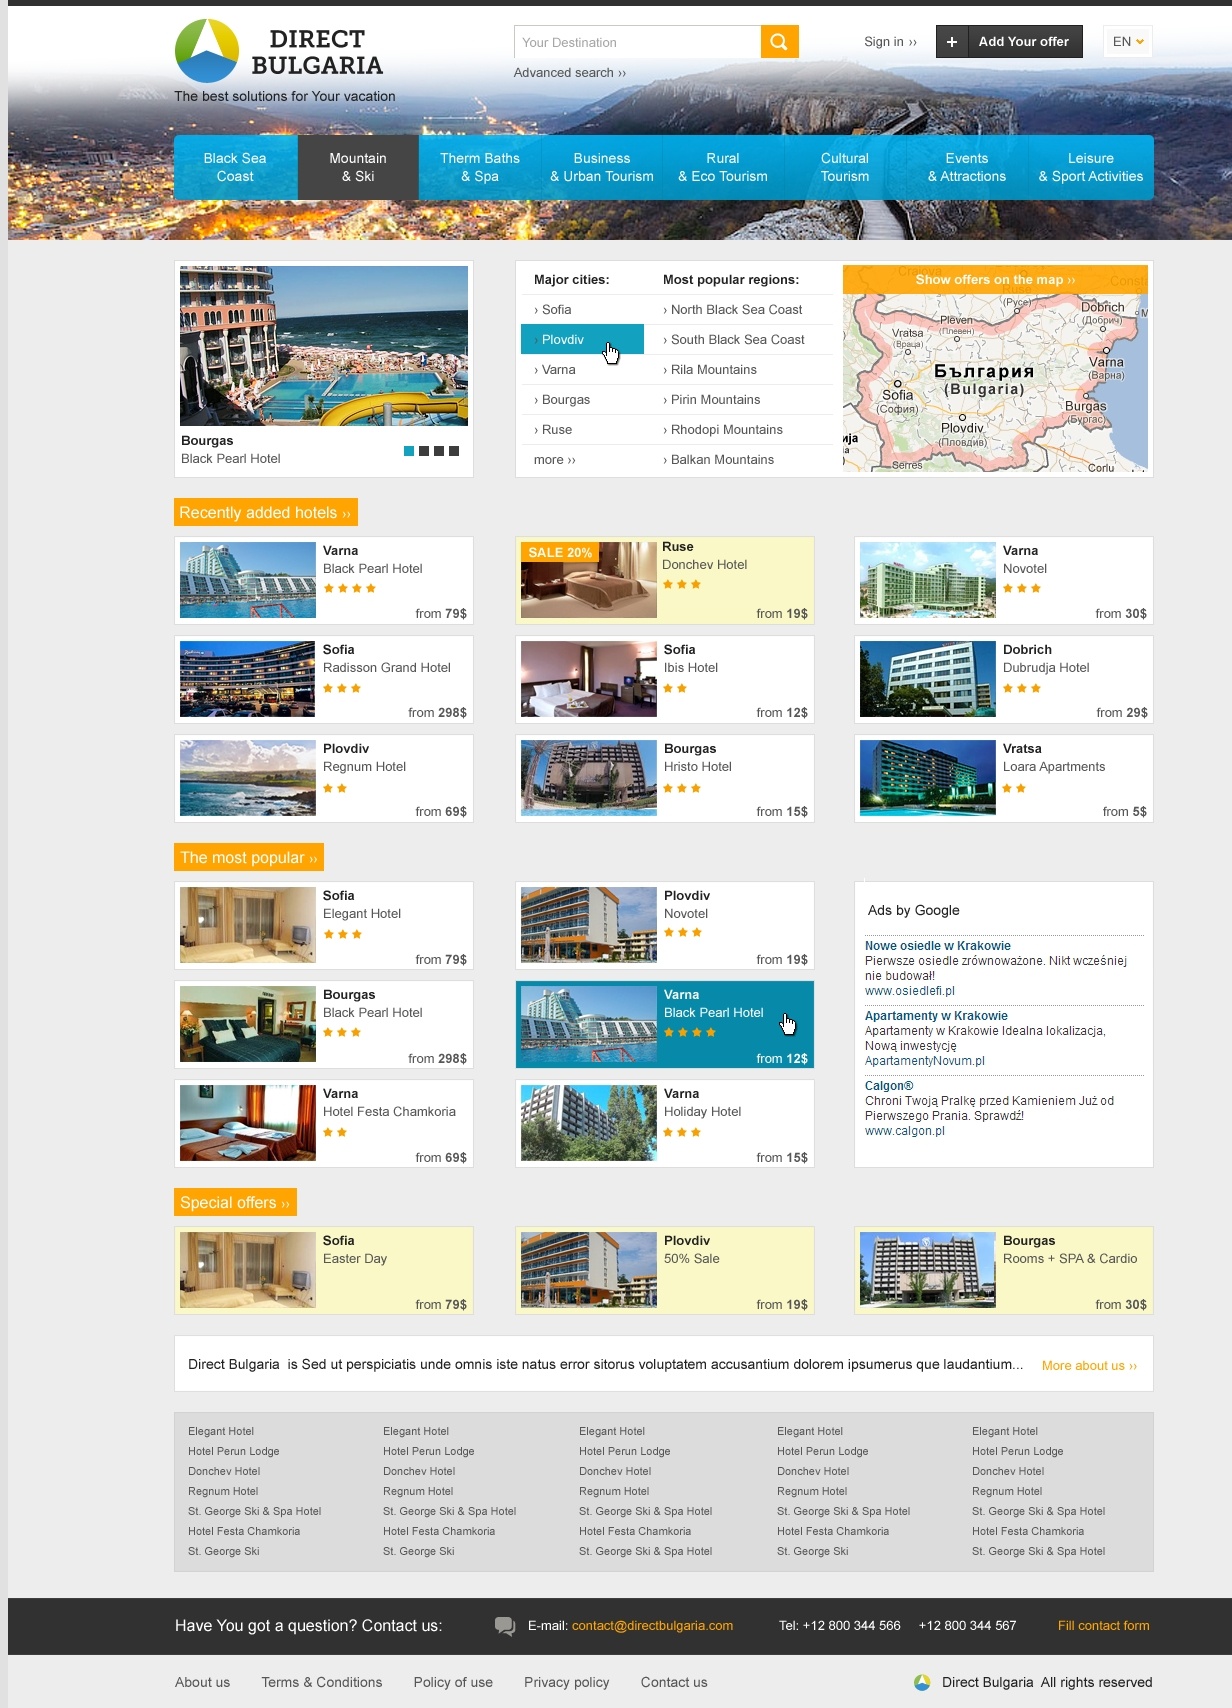 Hotels and apartments catalog